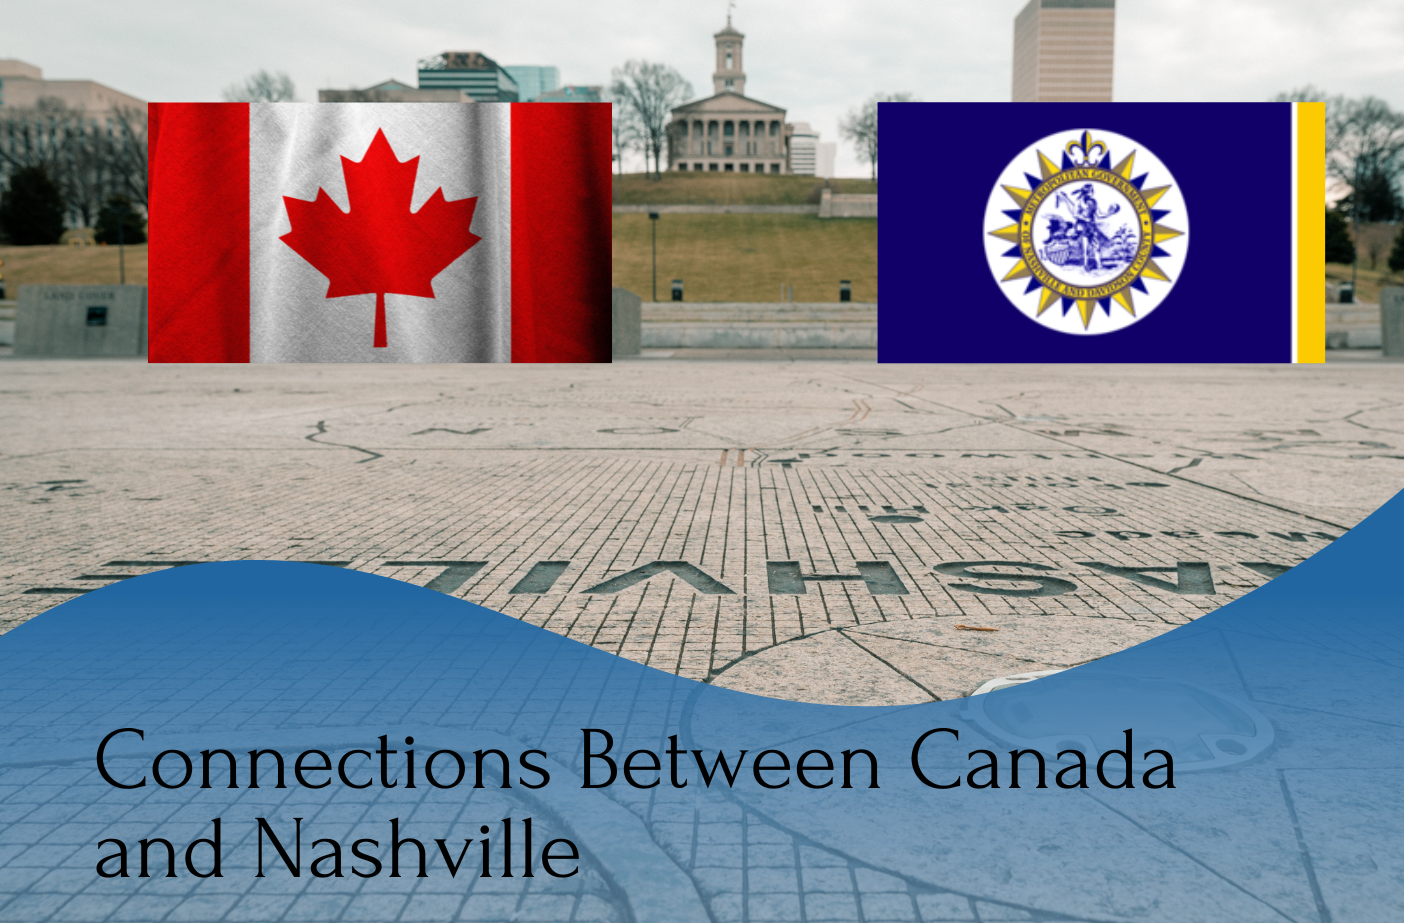 A photo of Canada and Nashville's flag and a written text "Connections Between Canada and Nashville"